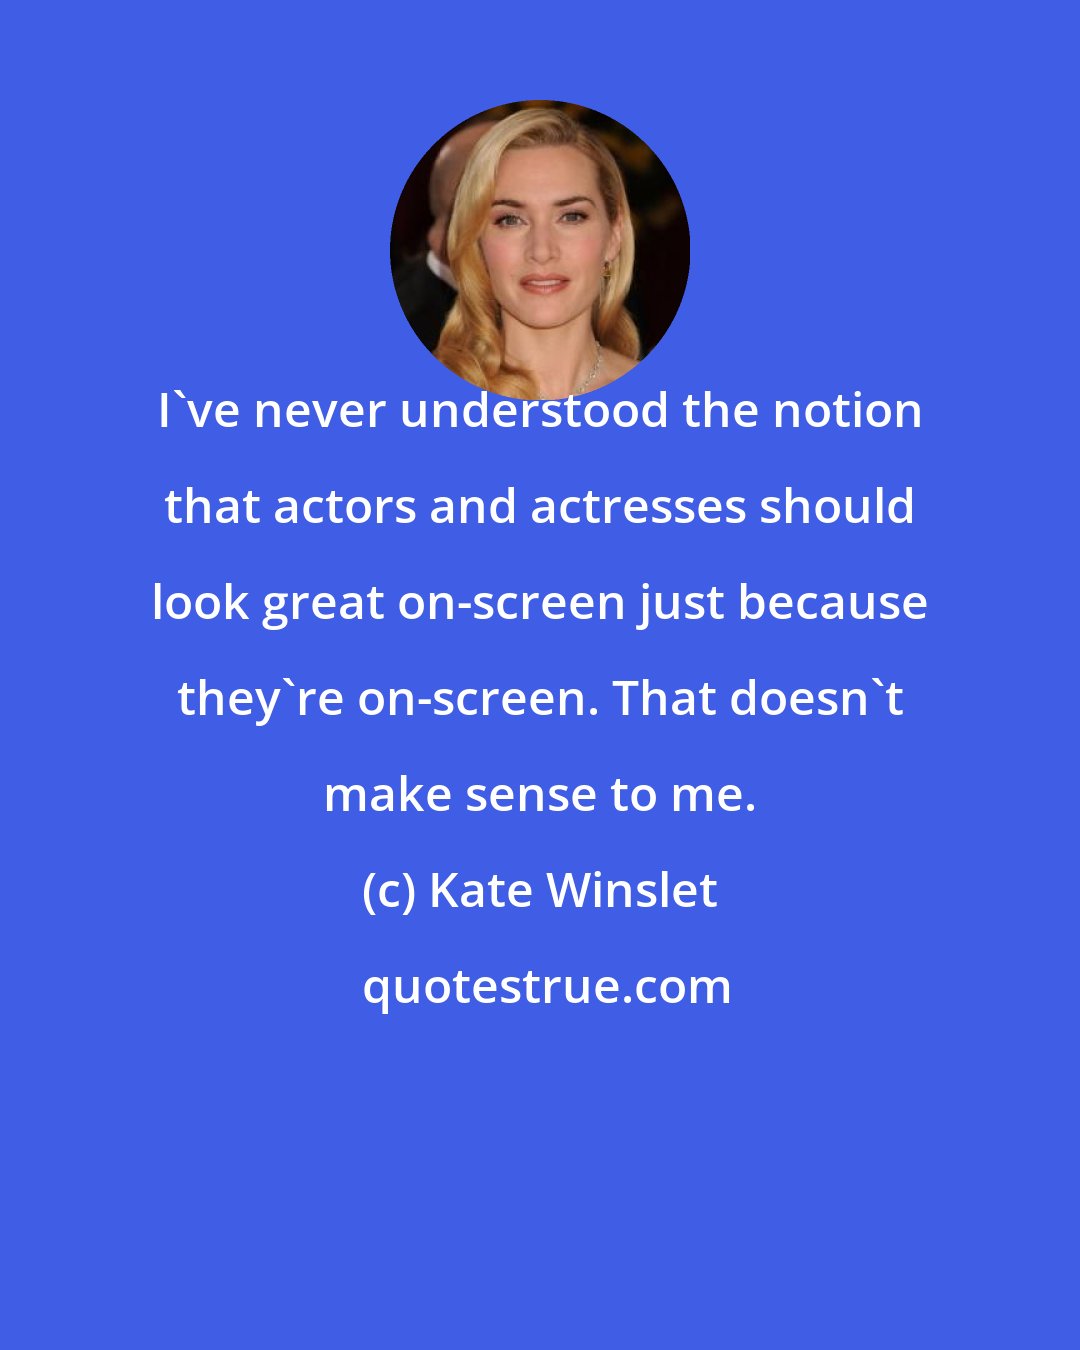 Kate Winslet: I've never understood the notion that actors and actresses should look great on-screen just because they're on-screen. That doesn't make sense to me.